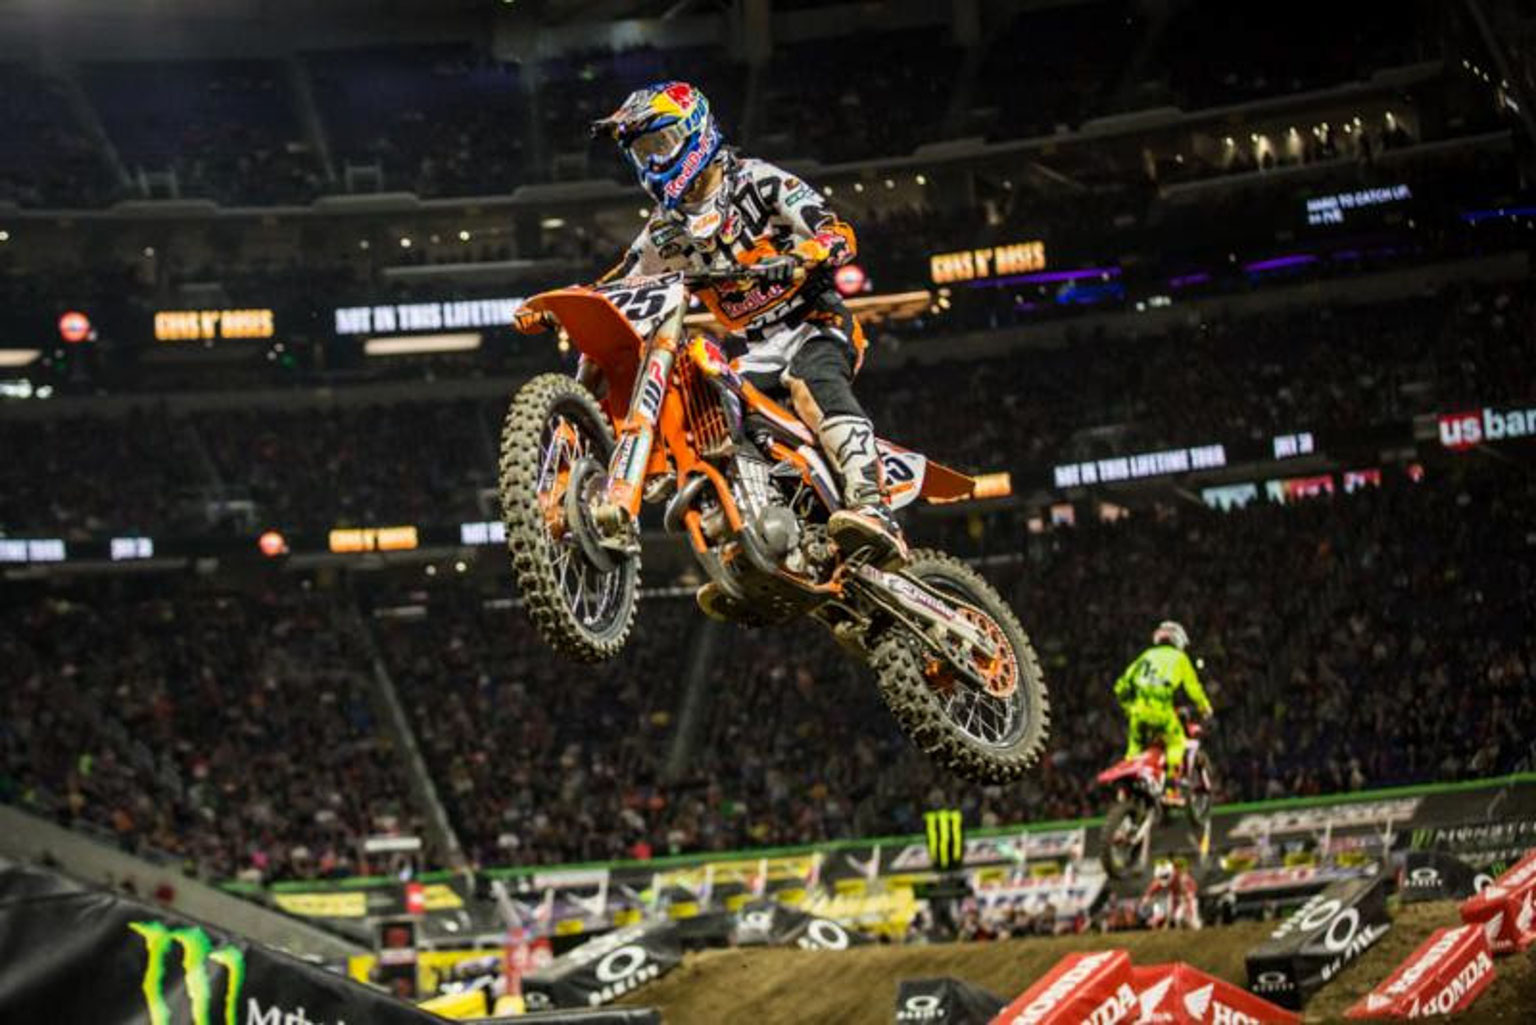 Musquin ended on the podium again